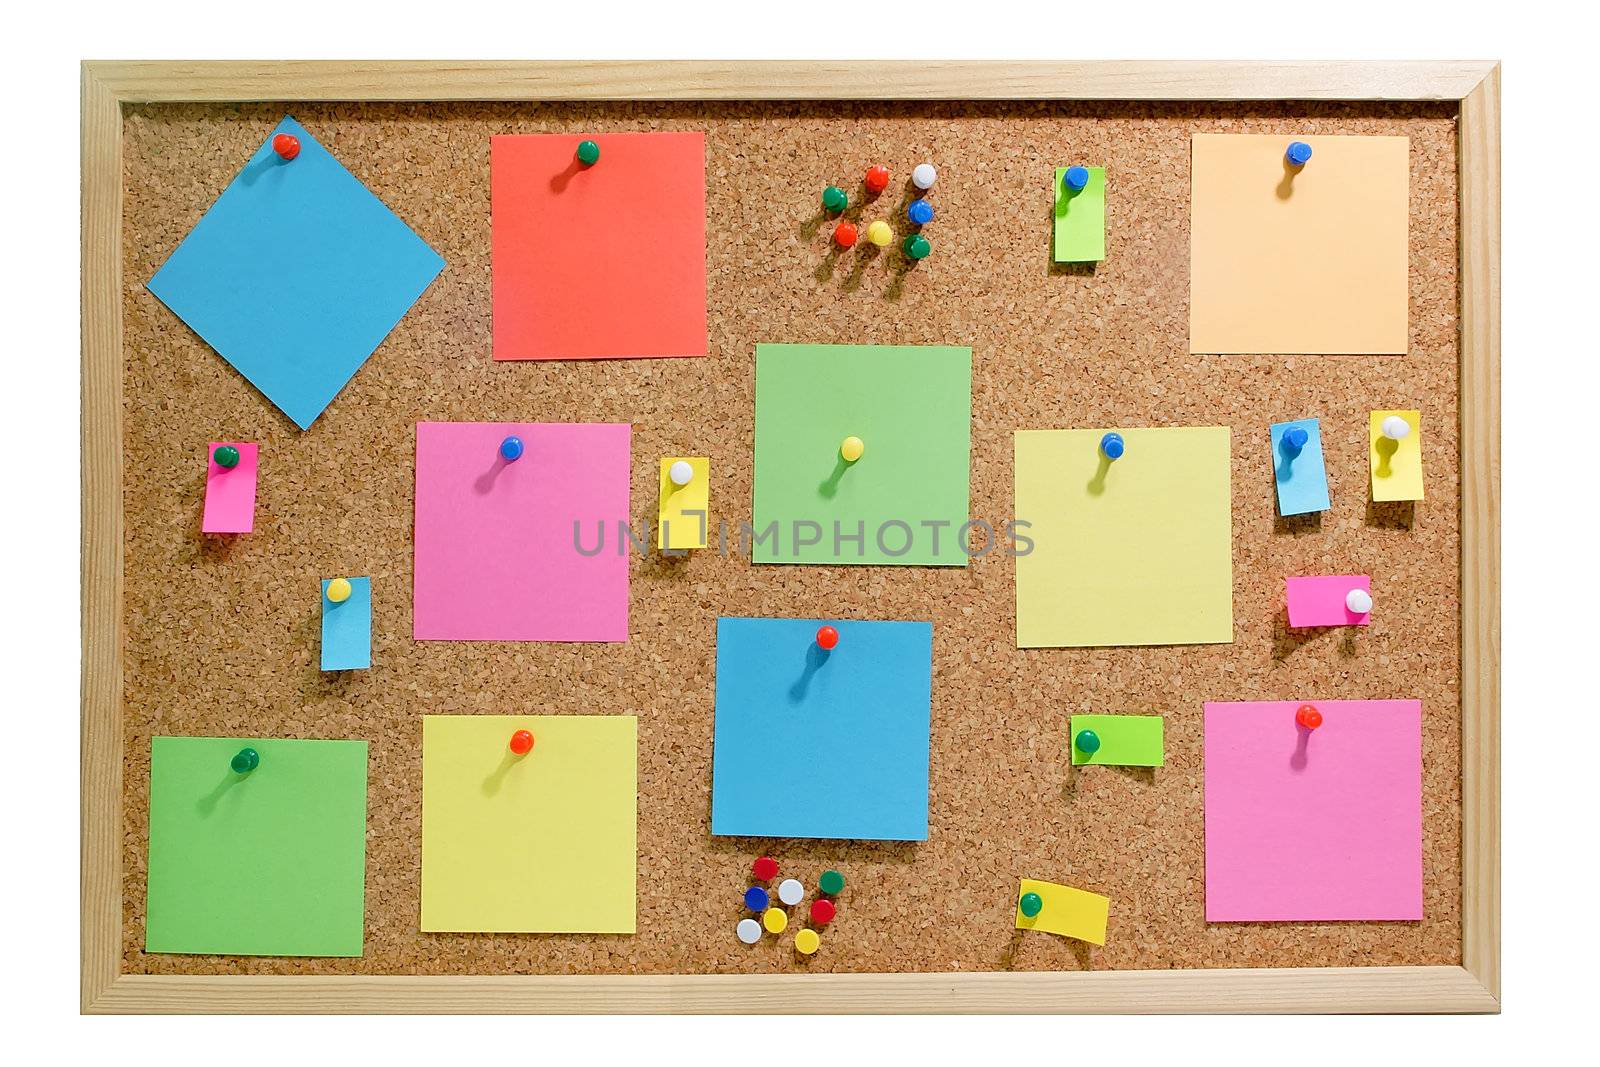  Colorful blank post it notes affixed to the corkboard.
